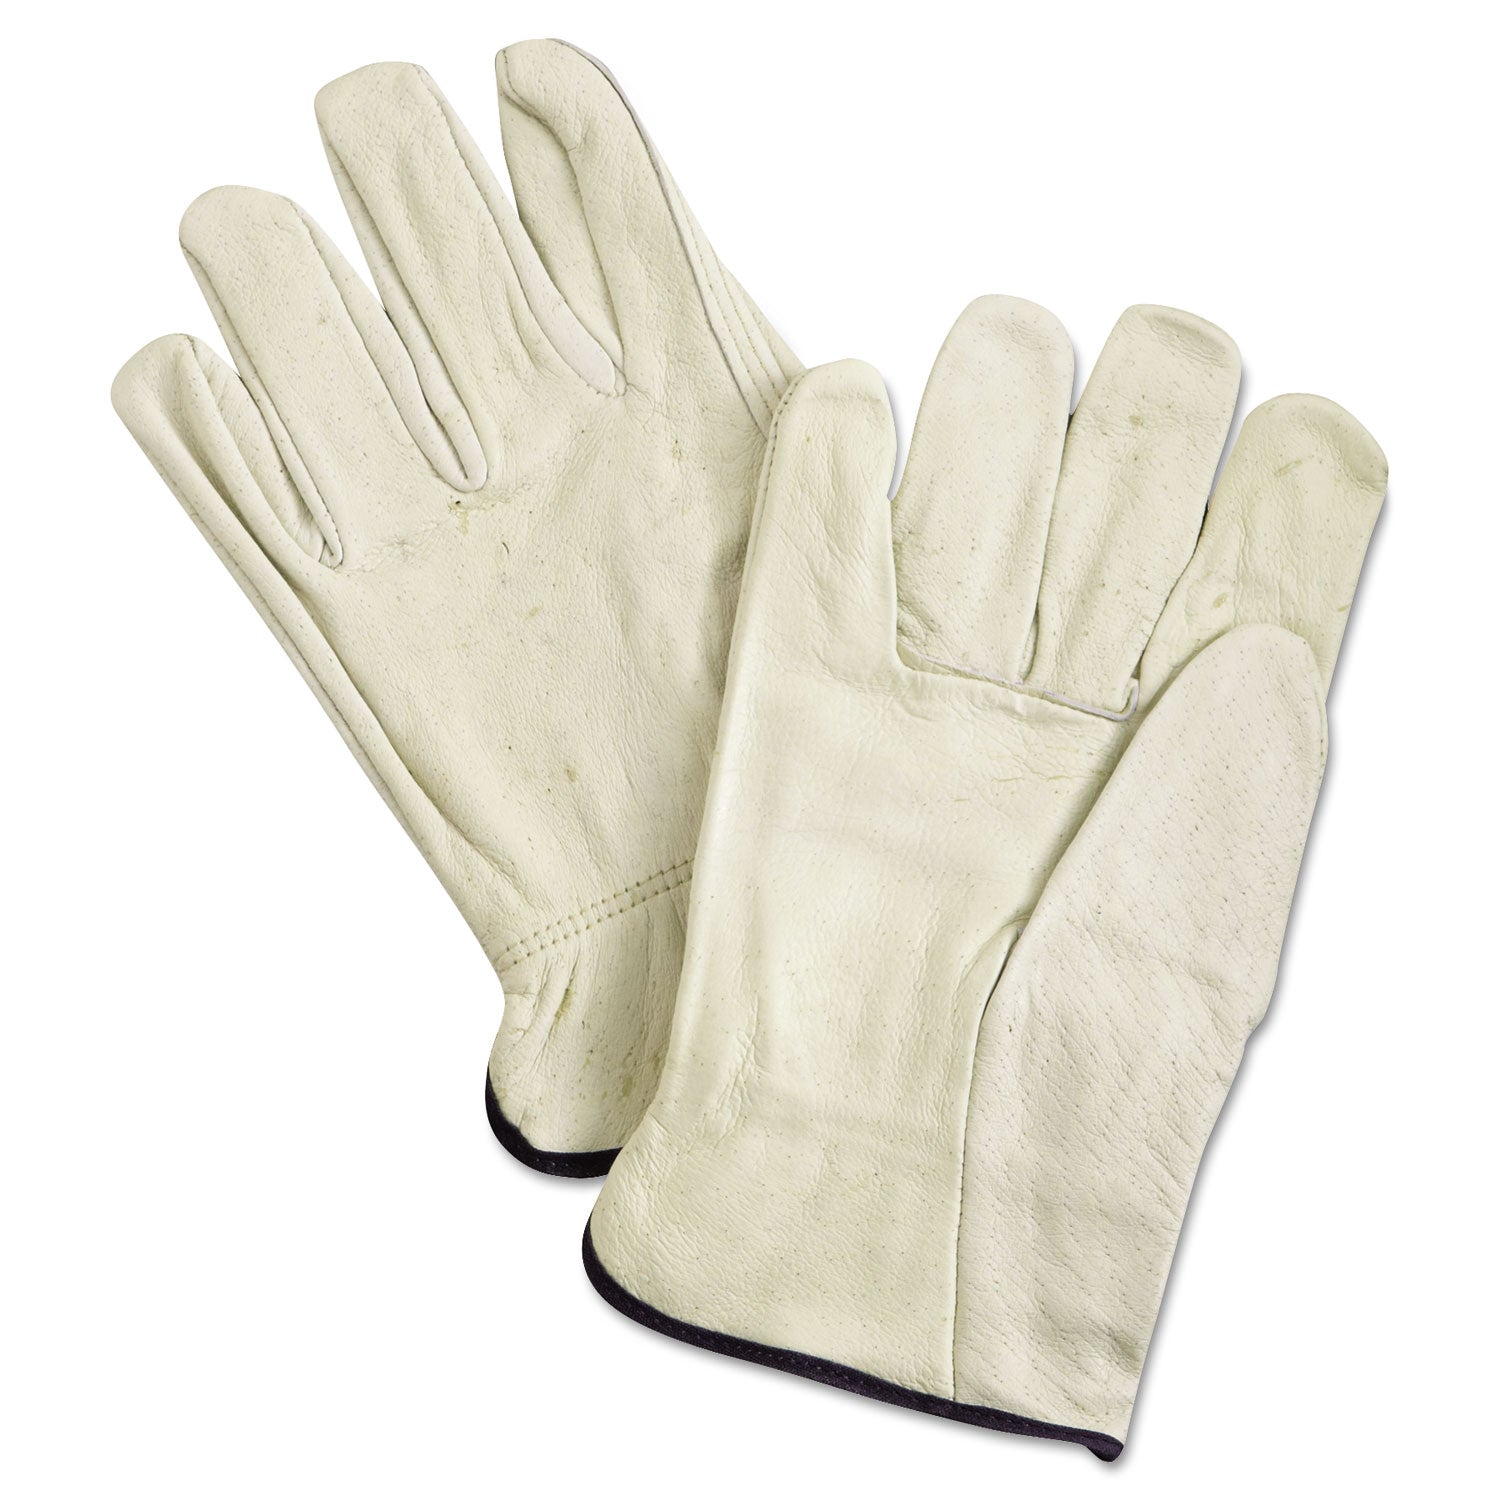 unlined-pigskin-driver-gloves-cream-x-large-12-pairs_mpg3400xl - 1